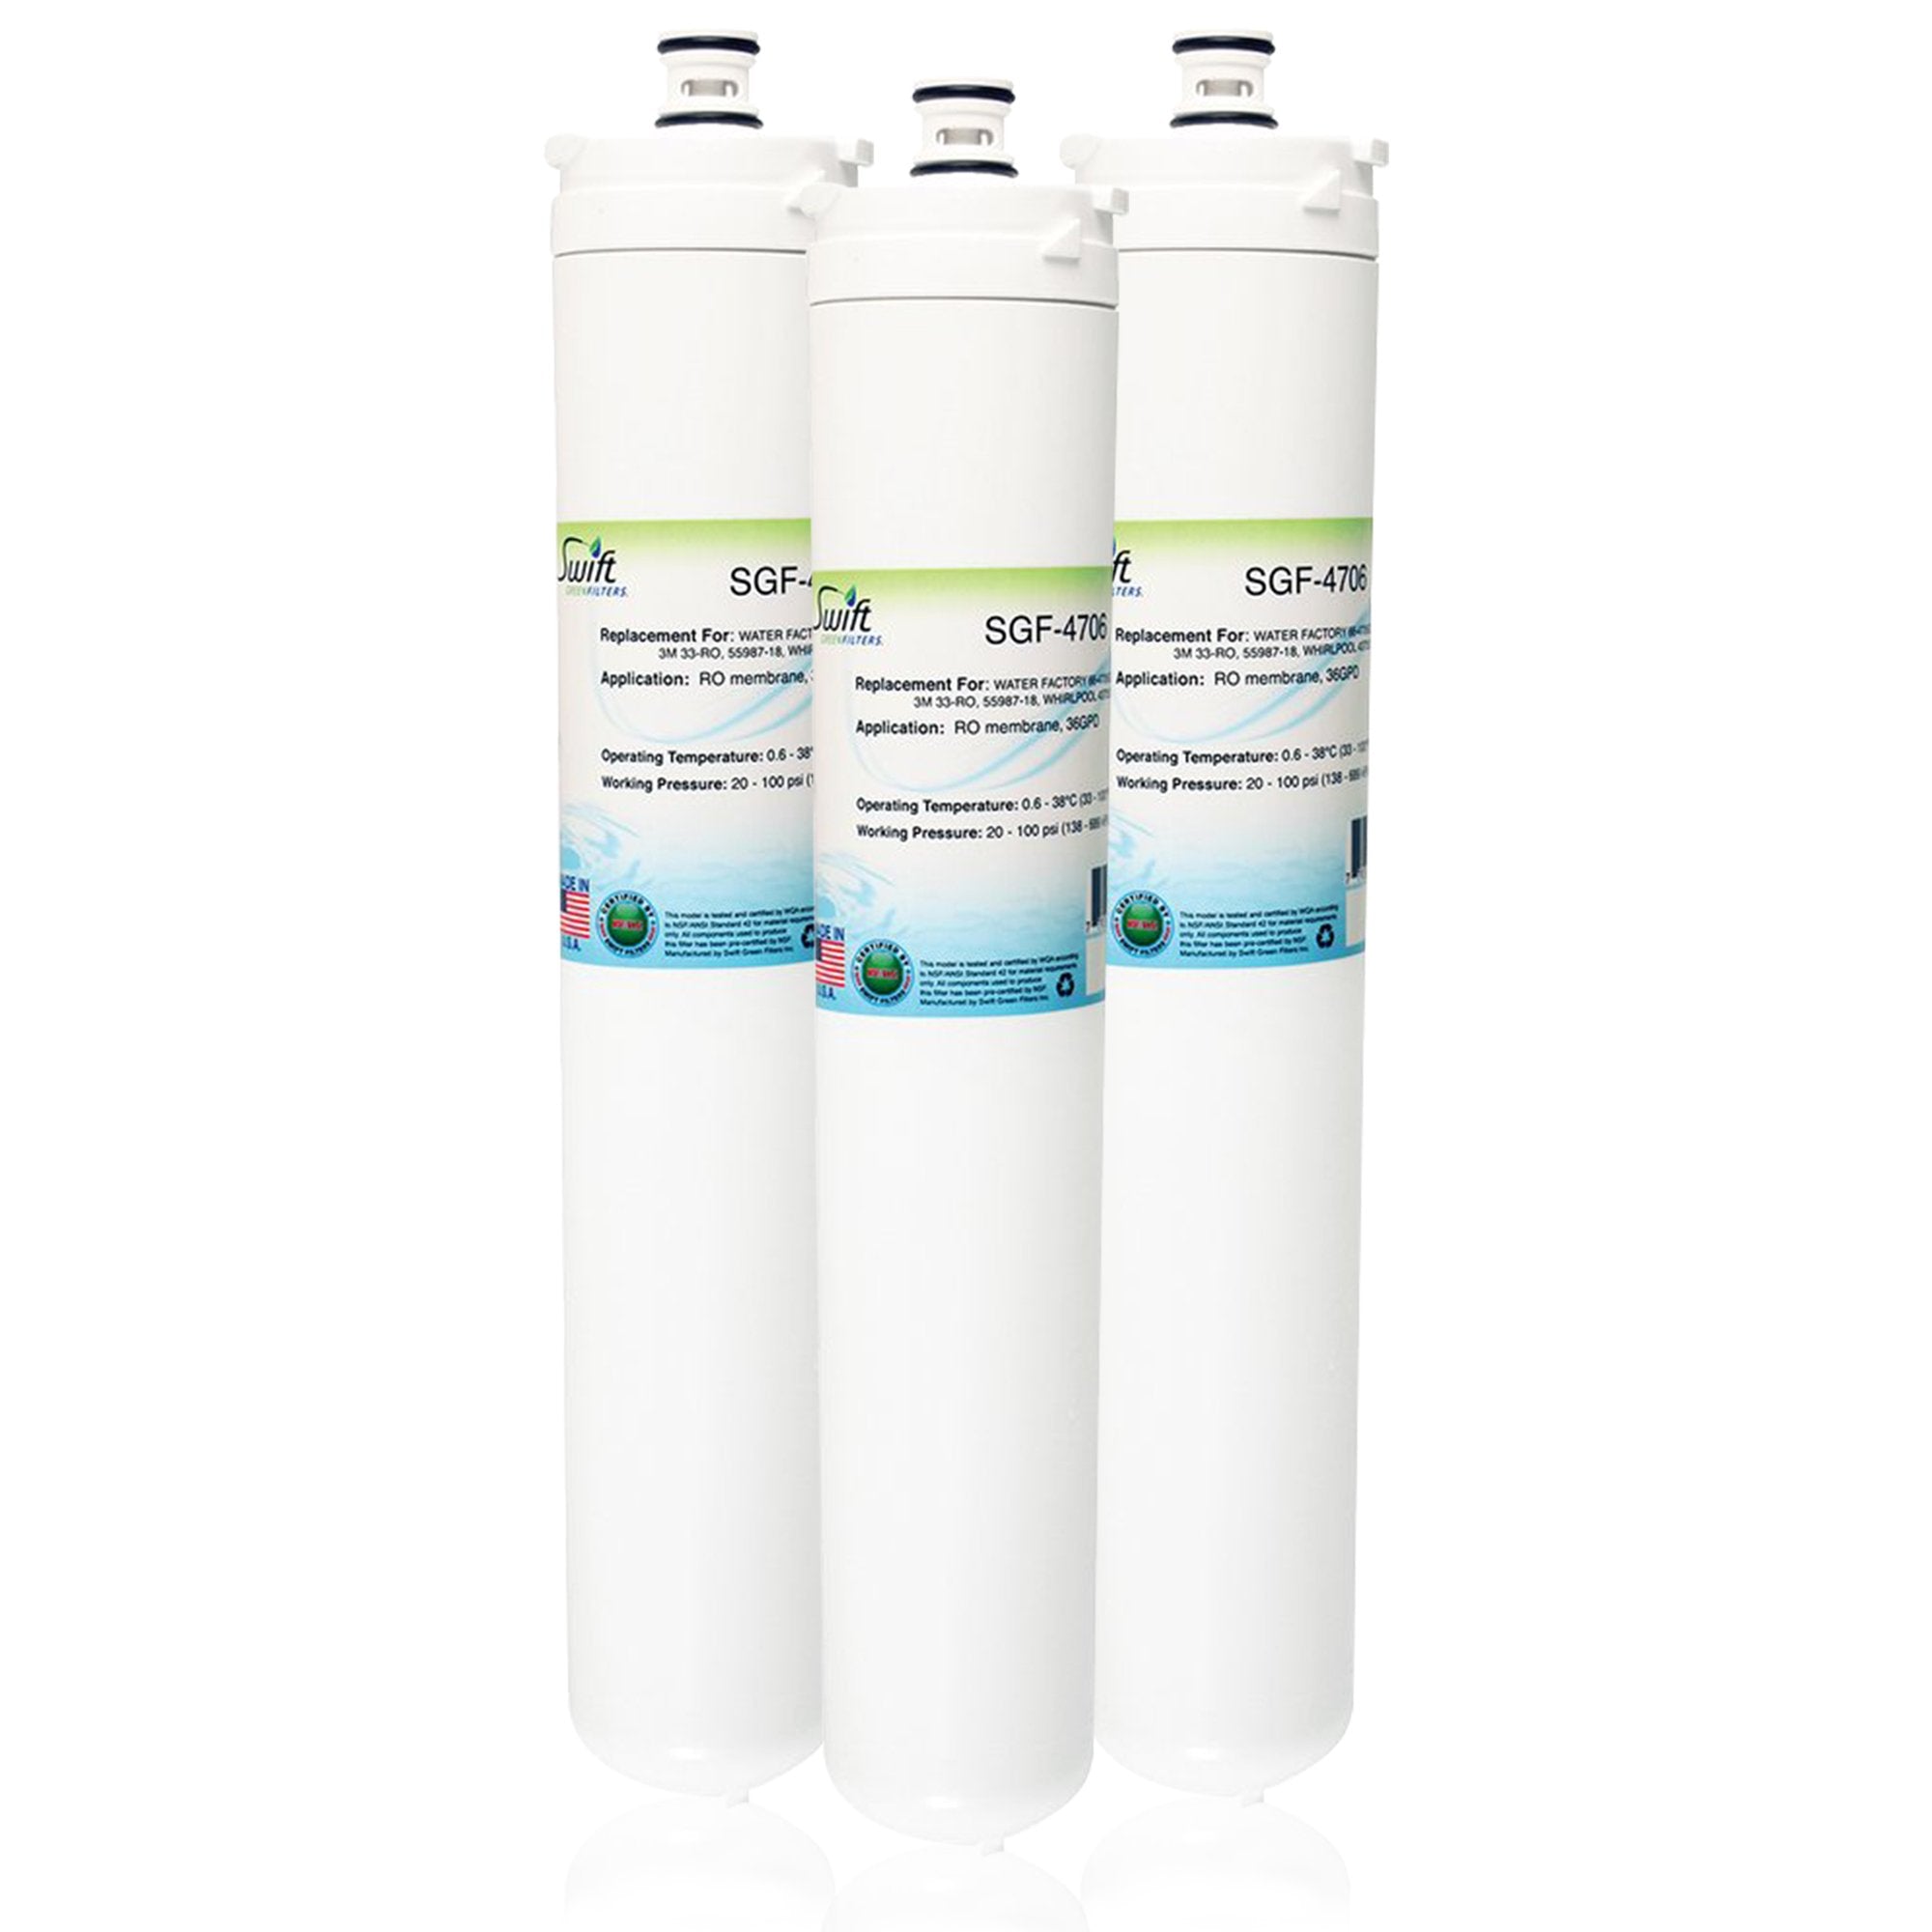 Replacement for 3M Water Factory 66-4706G2 Filter by Swift Green Filters SGF-4706